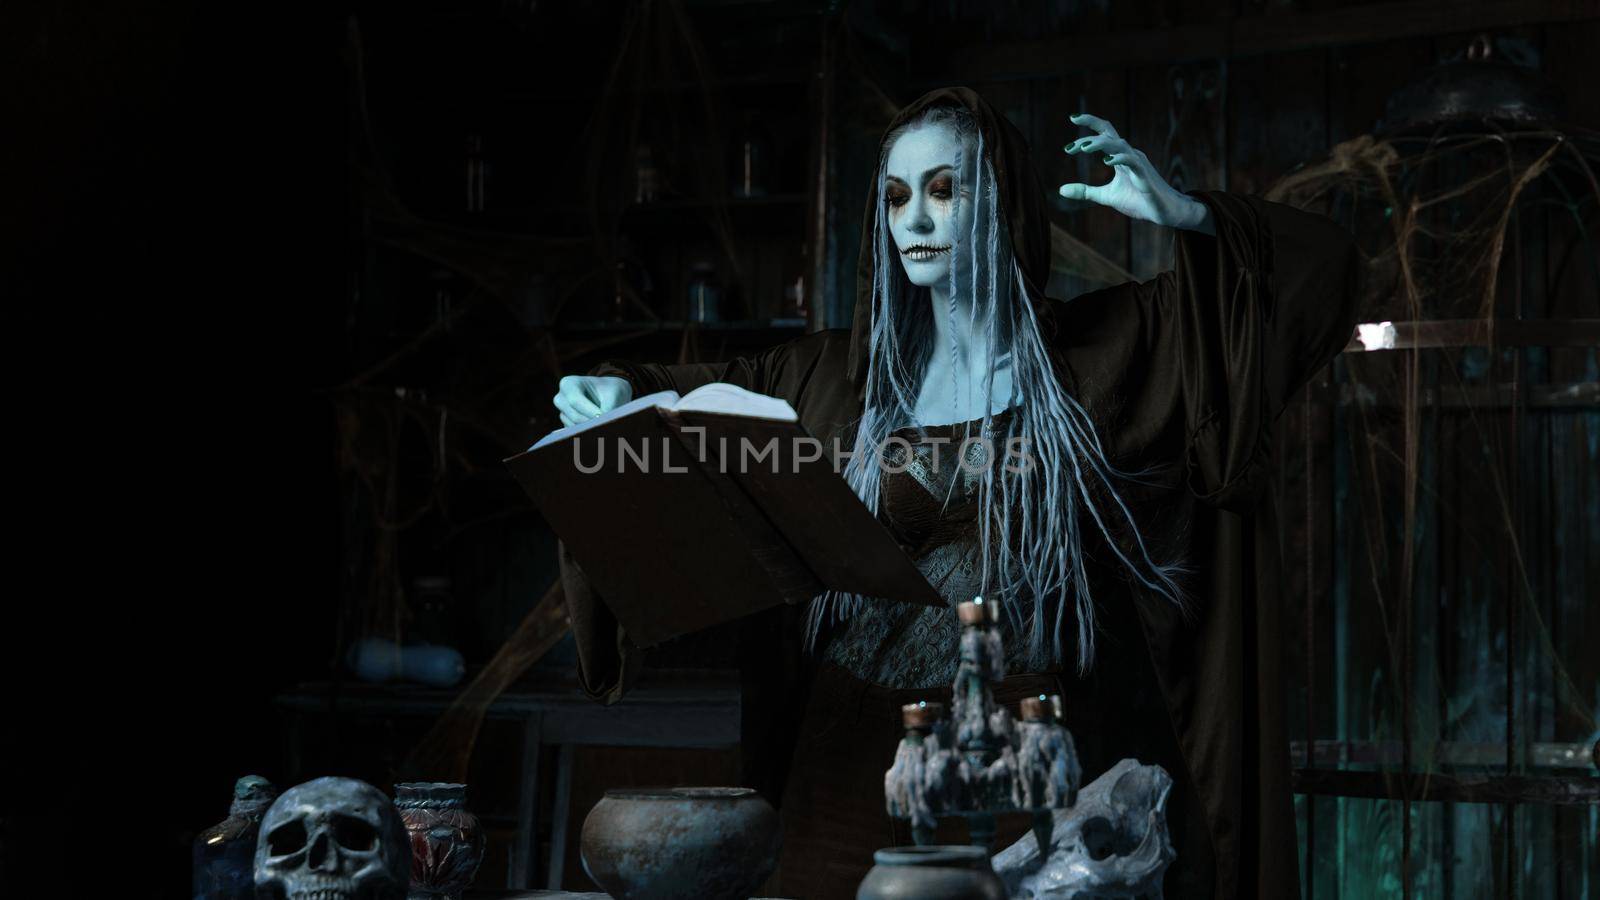 Halloween concept. Dead Cold Blue Witch dressed black hood with dreadlocks standing dark dungeon room use magic book for conjuring magic spell. Female necromancer wizard gothic interior